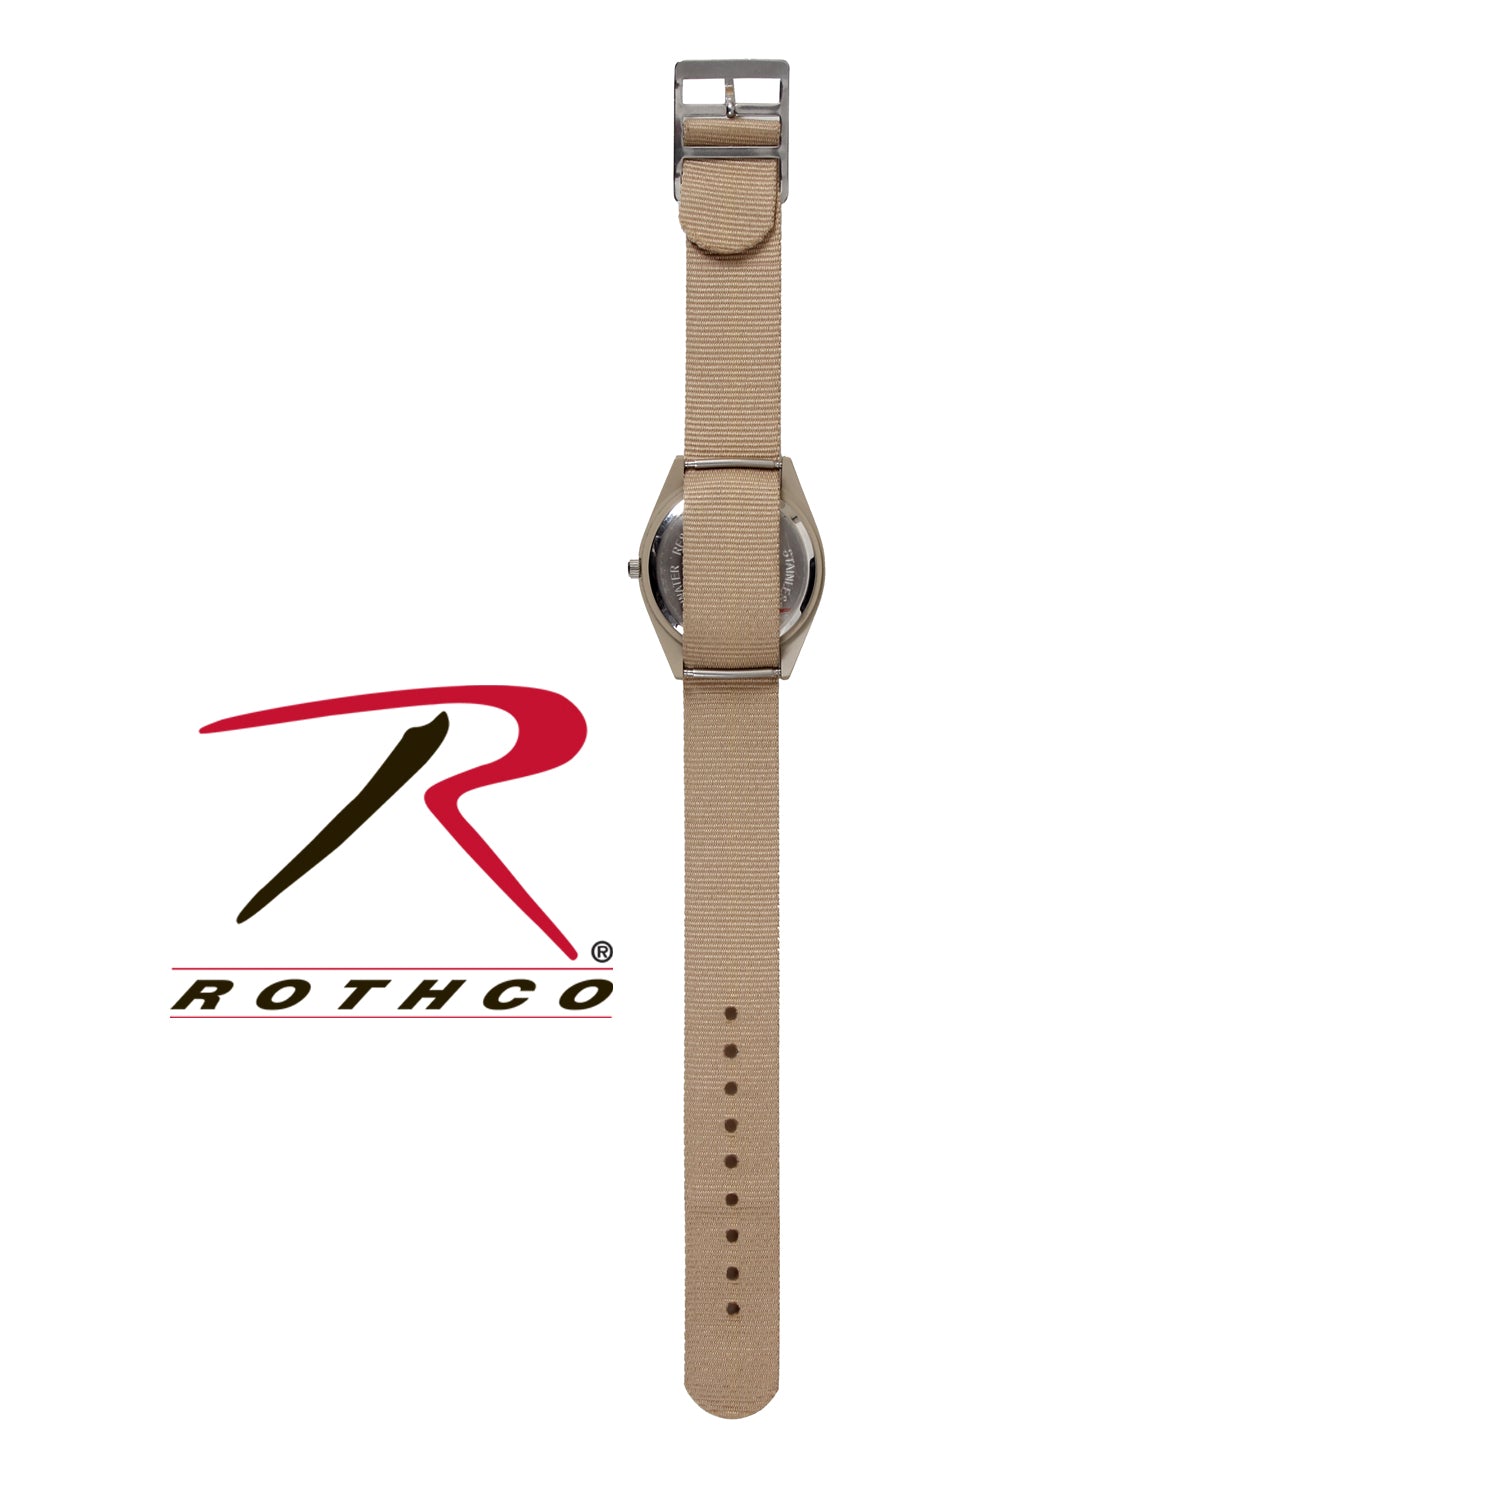 Rothco Field Watch worn by John Connor (Edward Furlong) in Terminator 2:  Judgment Day | Spotern